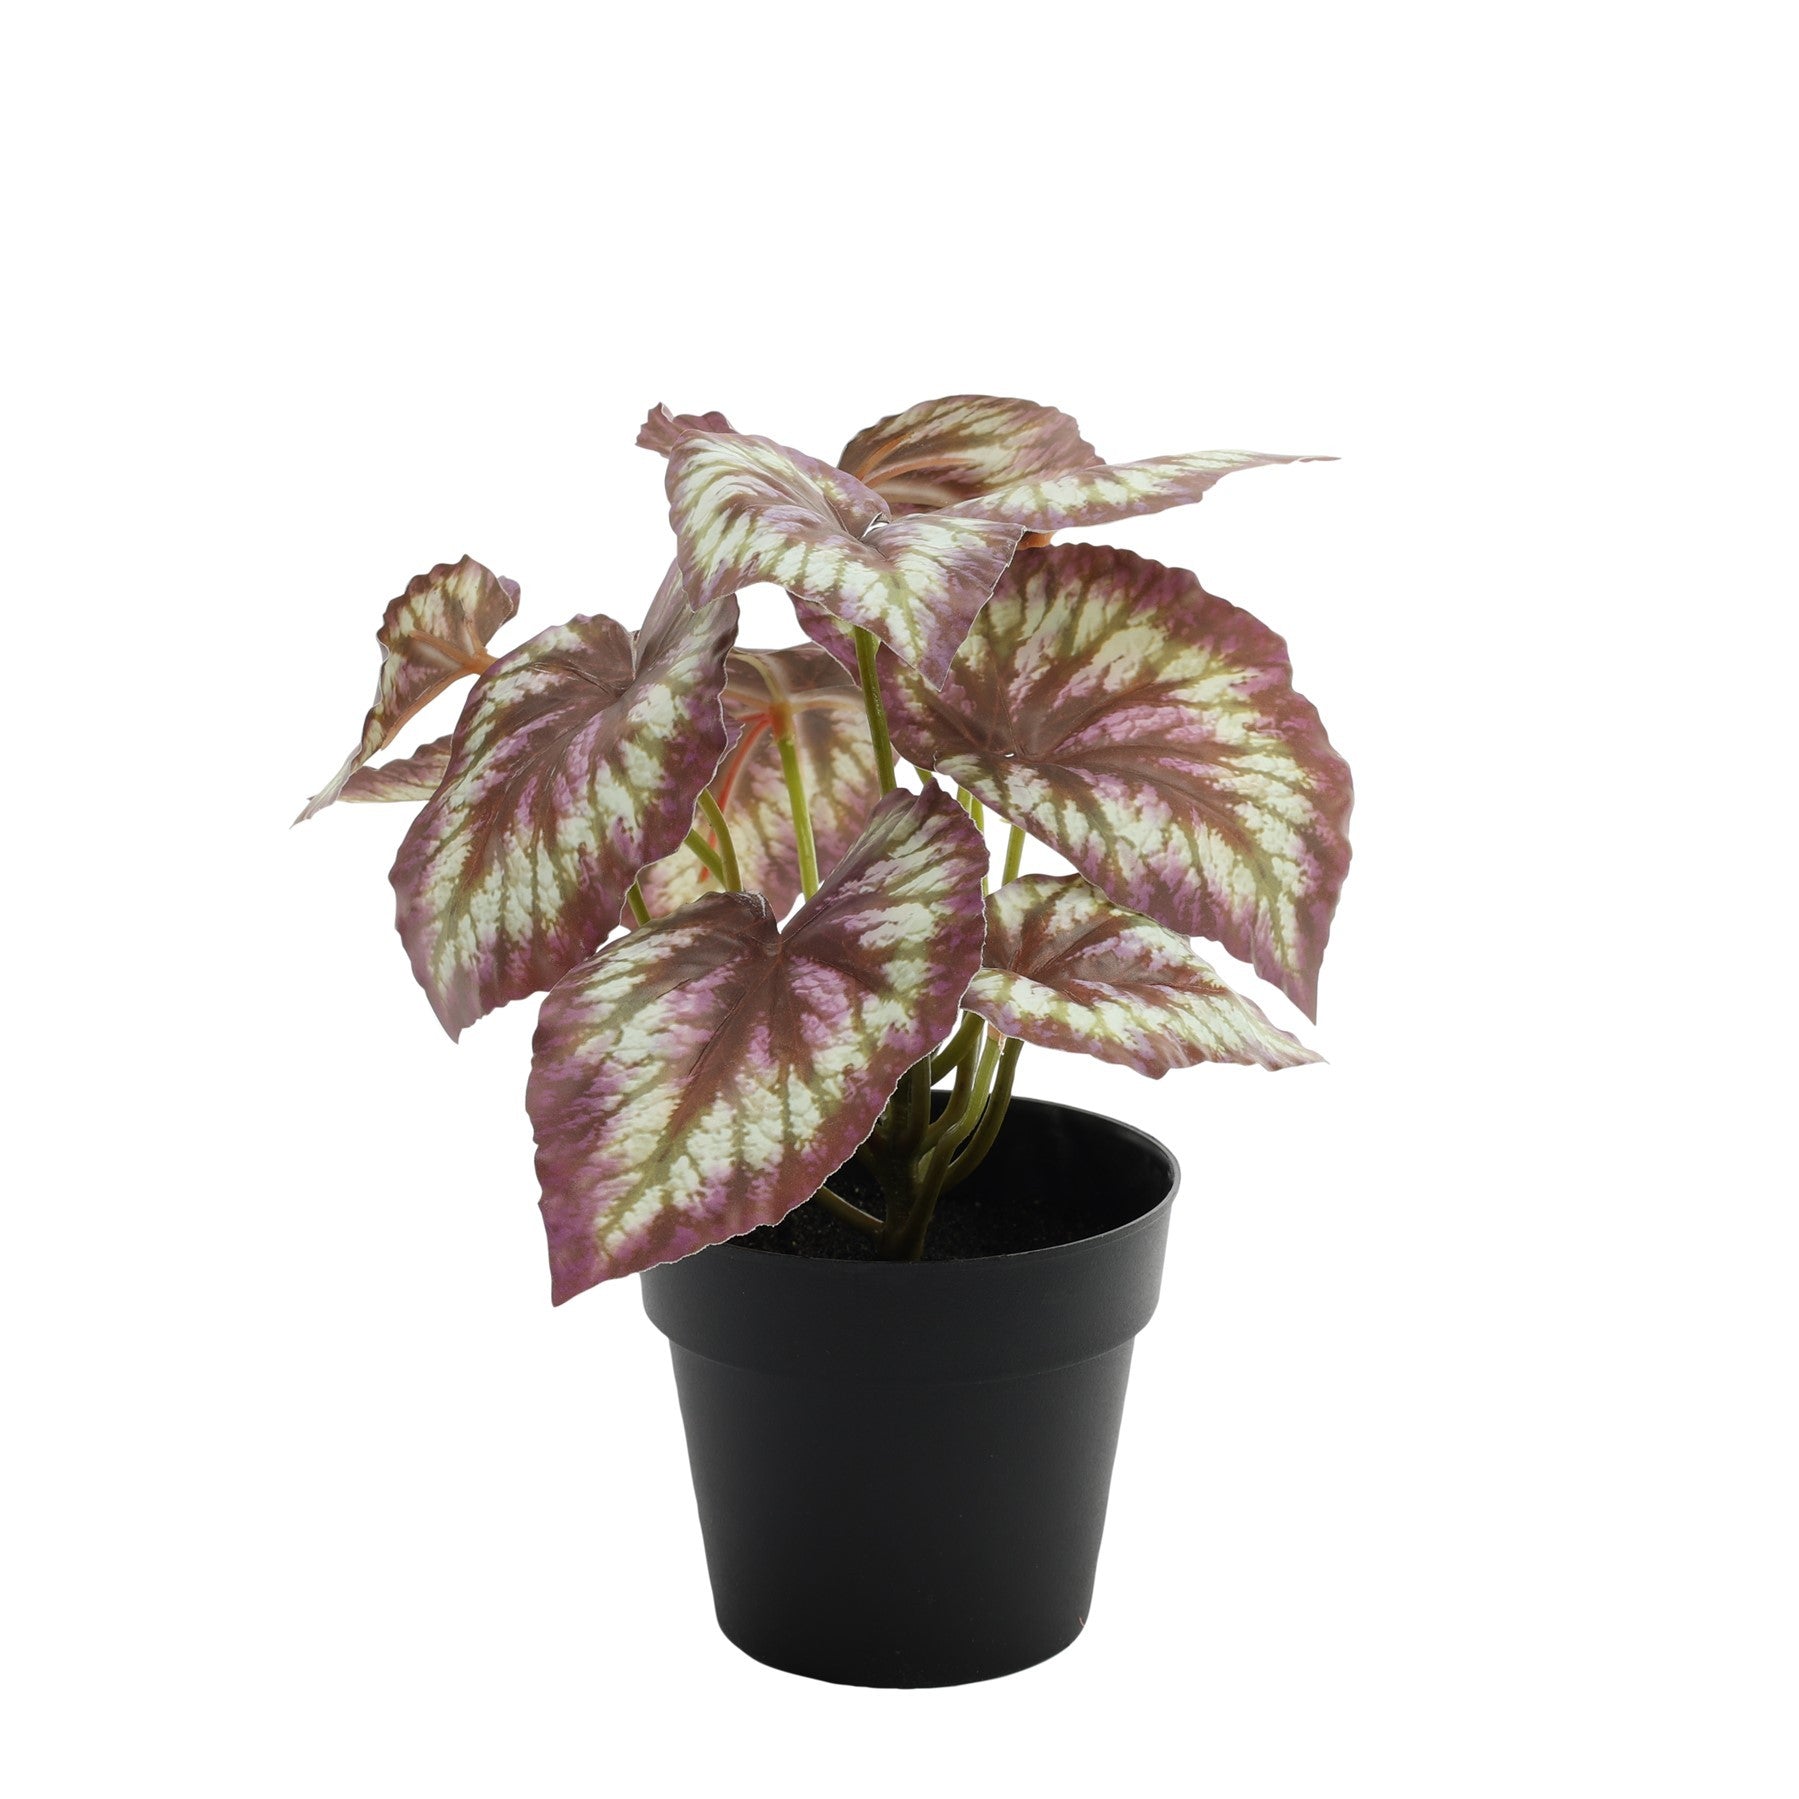 View Red Leafed Begonia Potted House Plant 22cm information